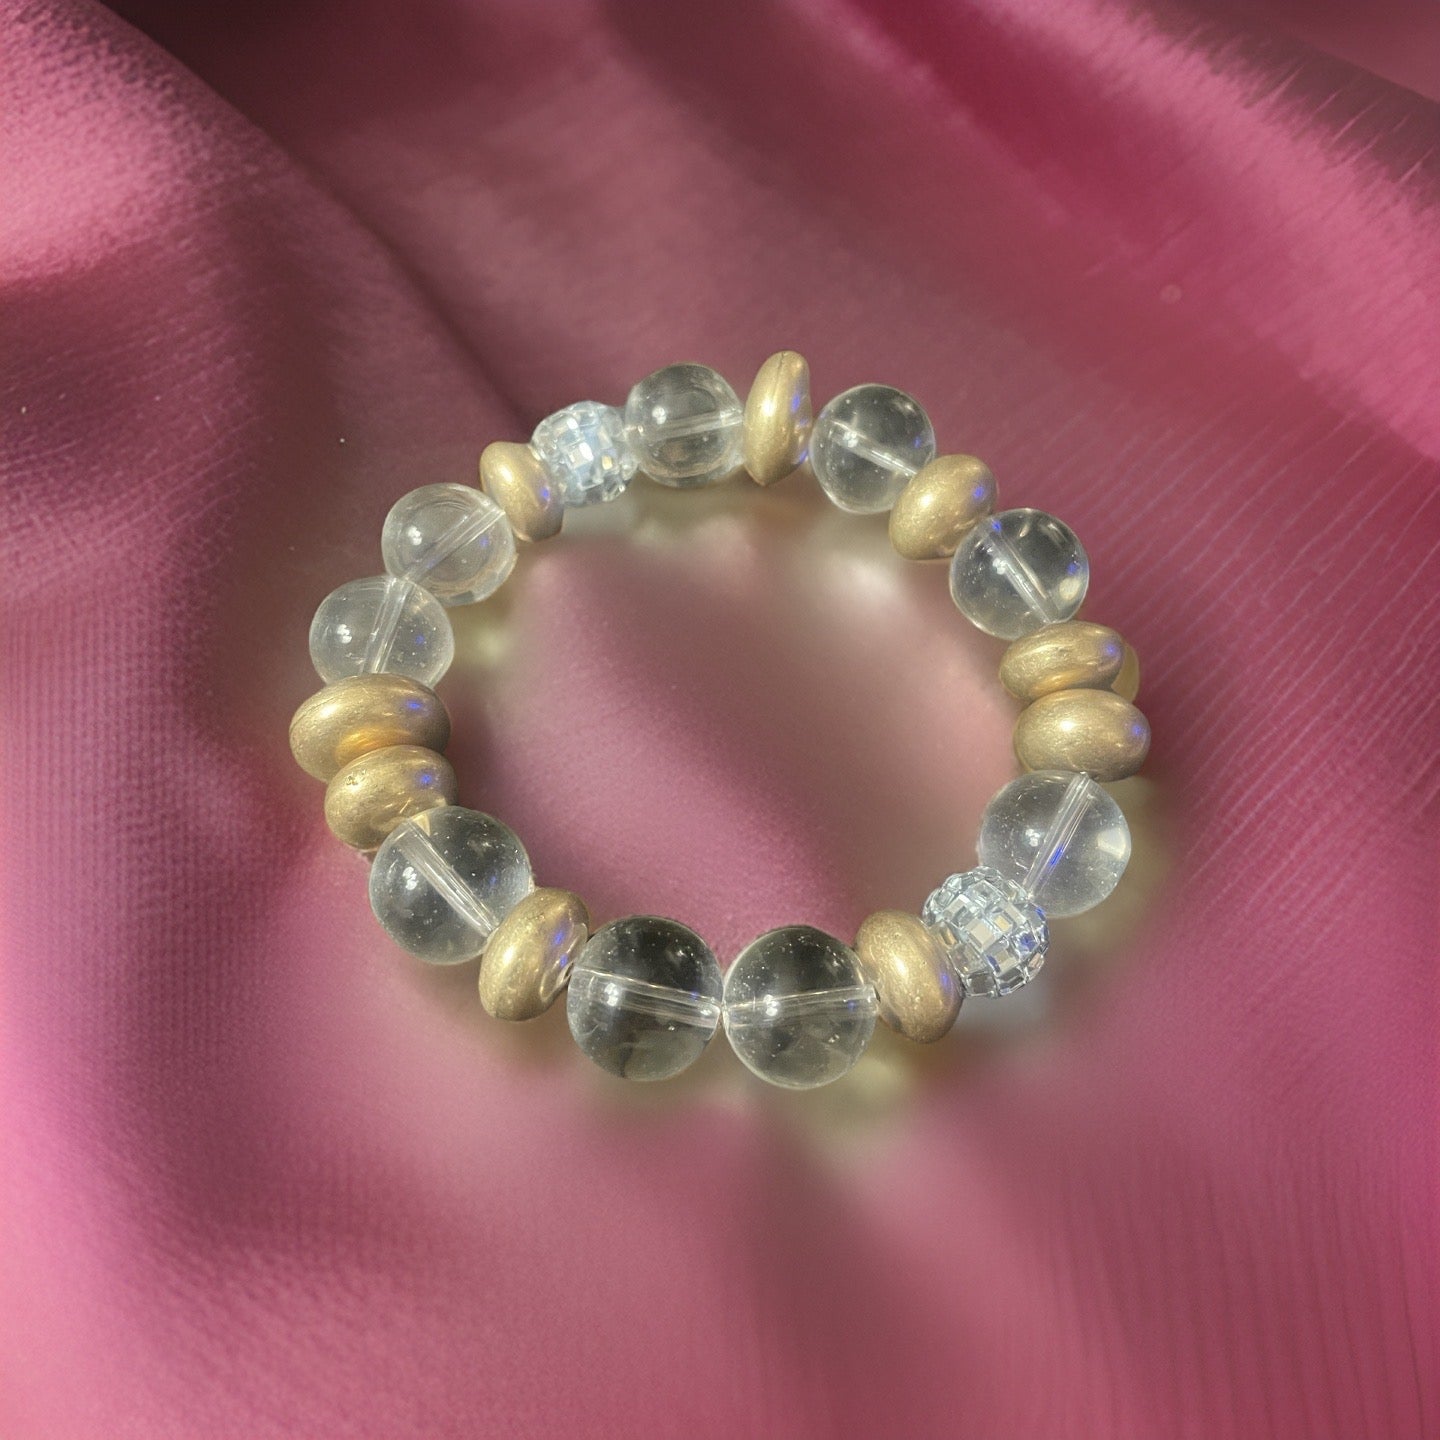 Large Clear beads with gold or silver rounded disc beads and bling beads. Available in 2 colors.